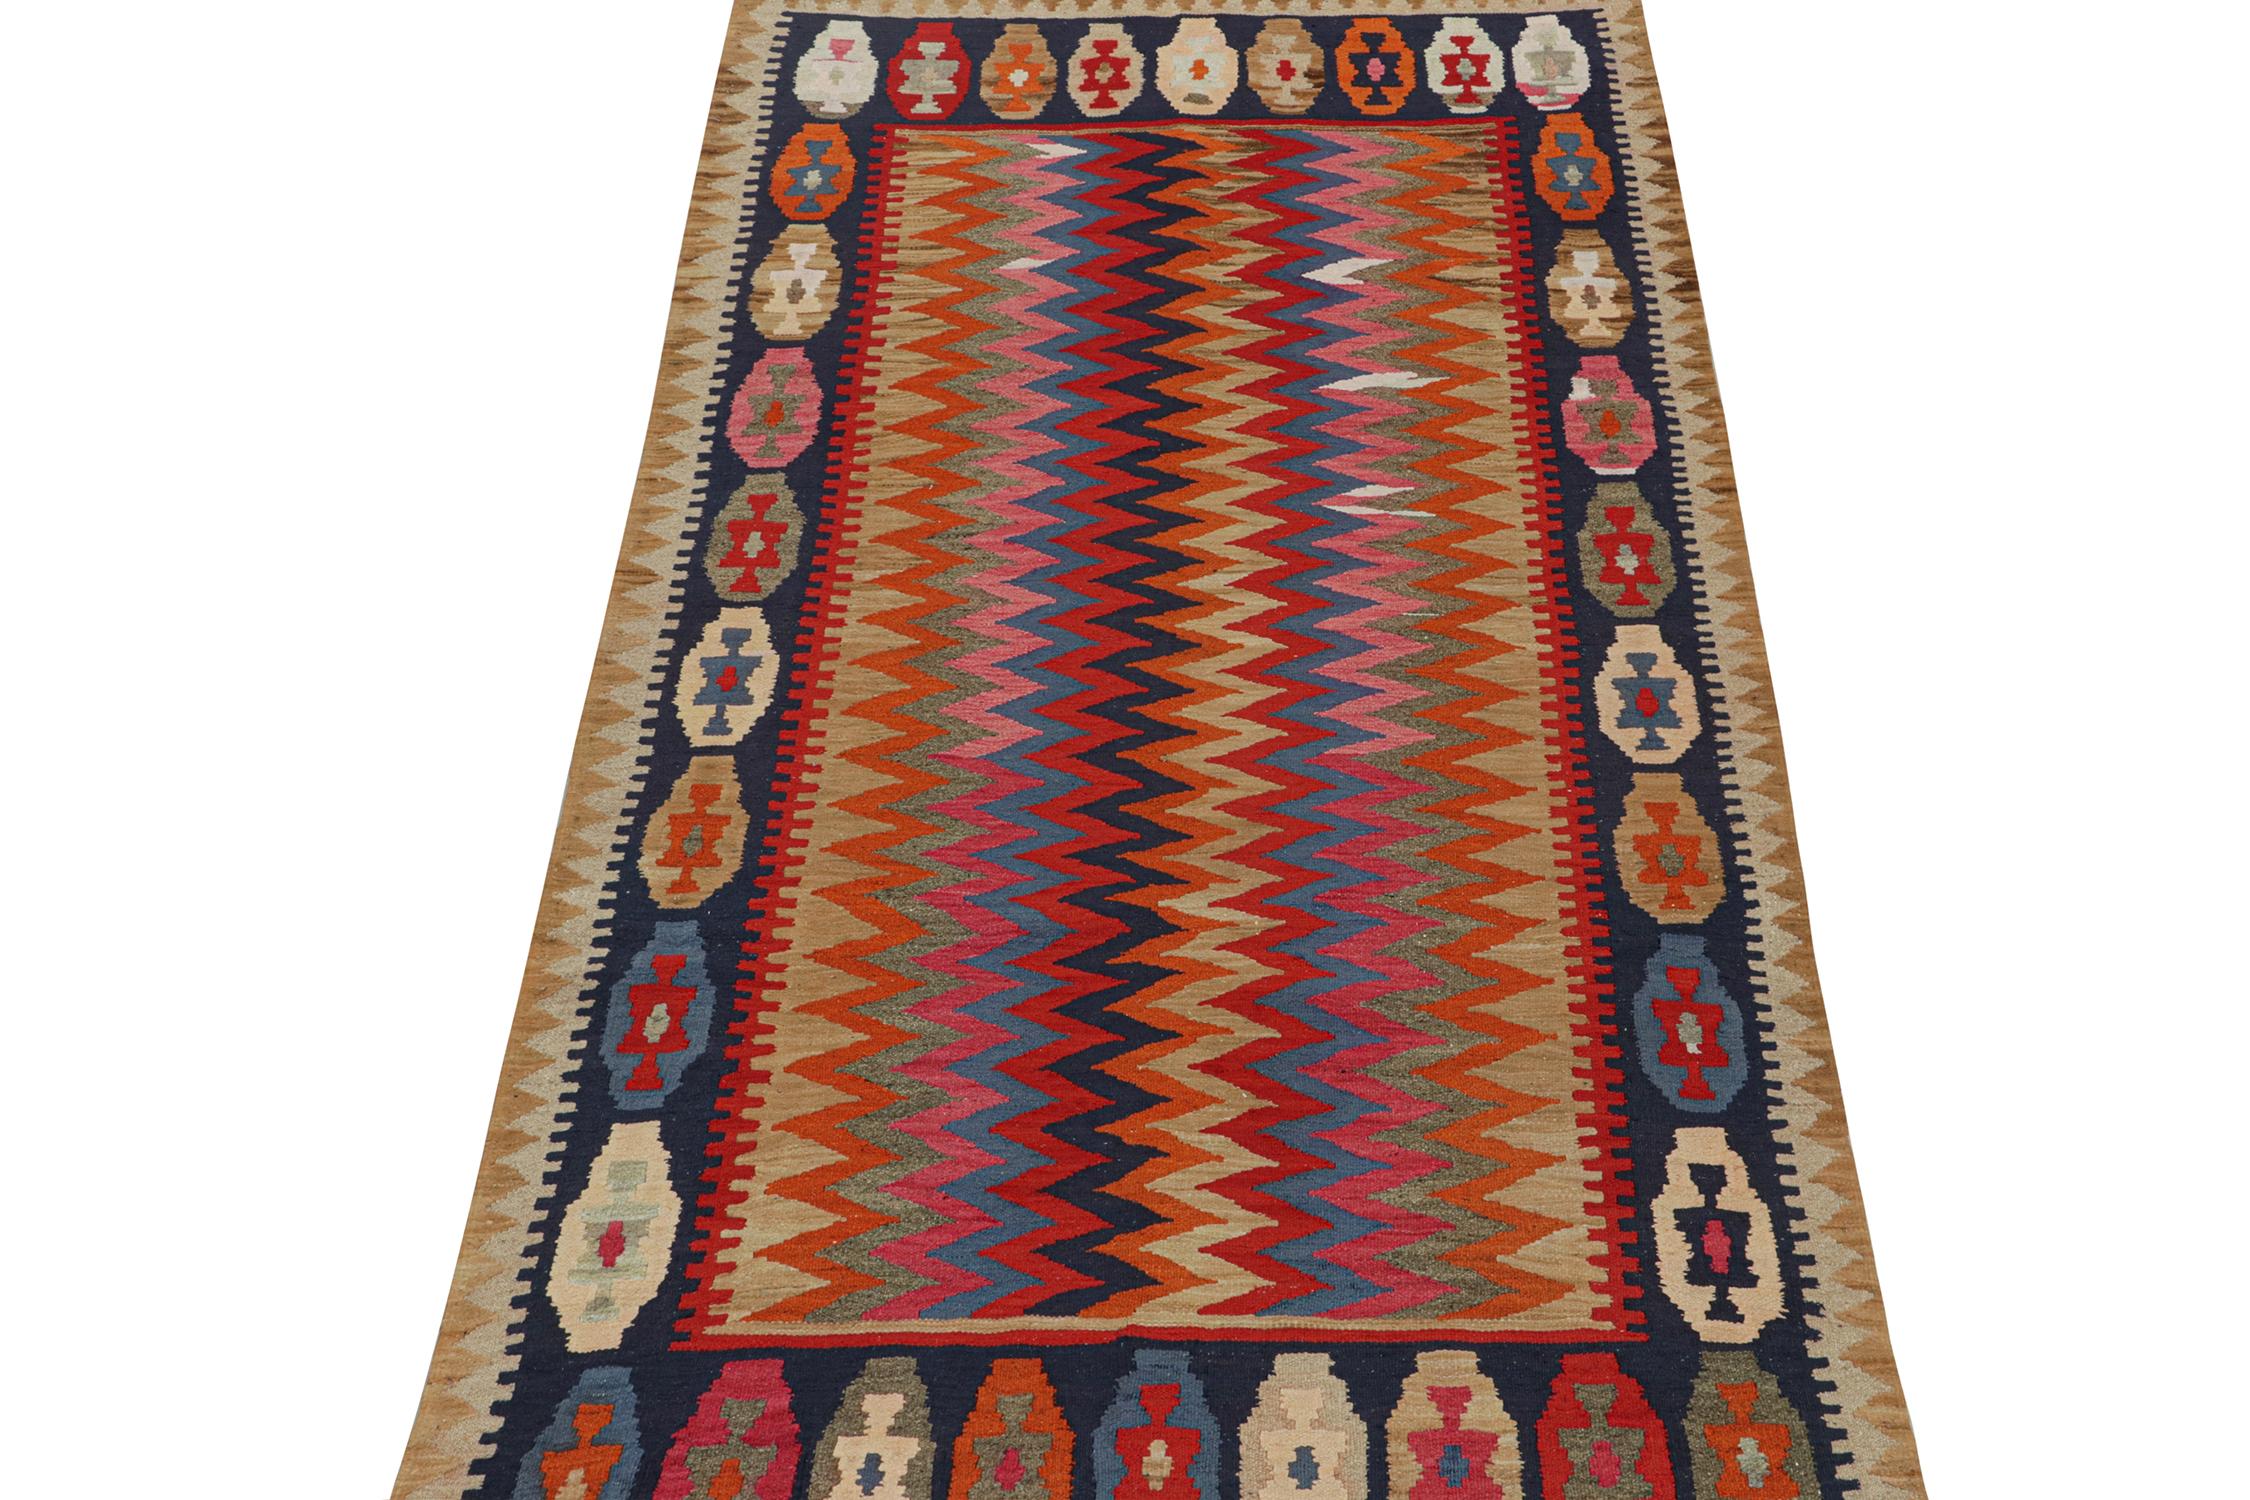 This vintage 4x8 Shahsavan kilim is a unique tribal rug for its period—hailing from Persia circa 1950-1960. Handwoven in wool.

Further on the Design:

The field hosts patterns alternating in blue, red, brown, pink, grey & orange variations.